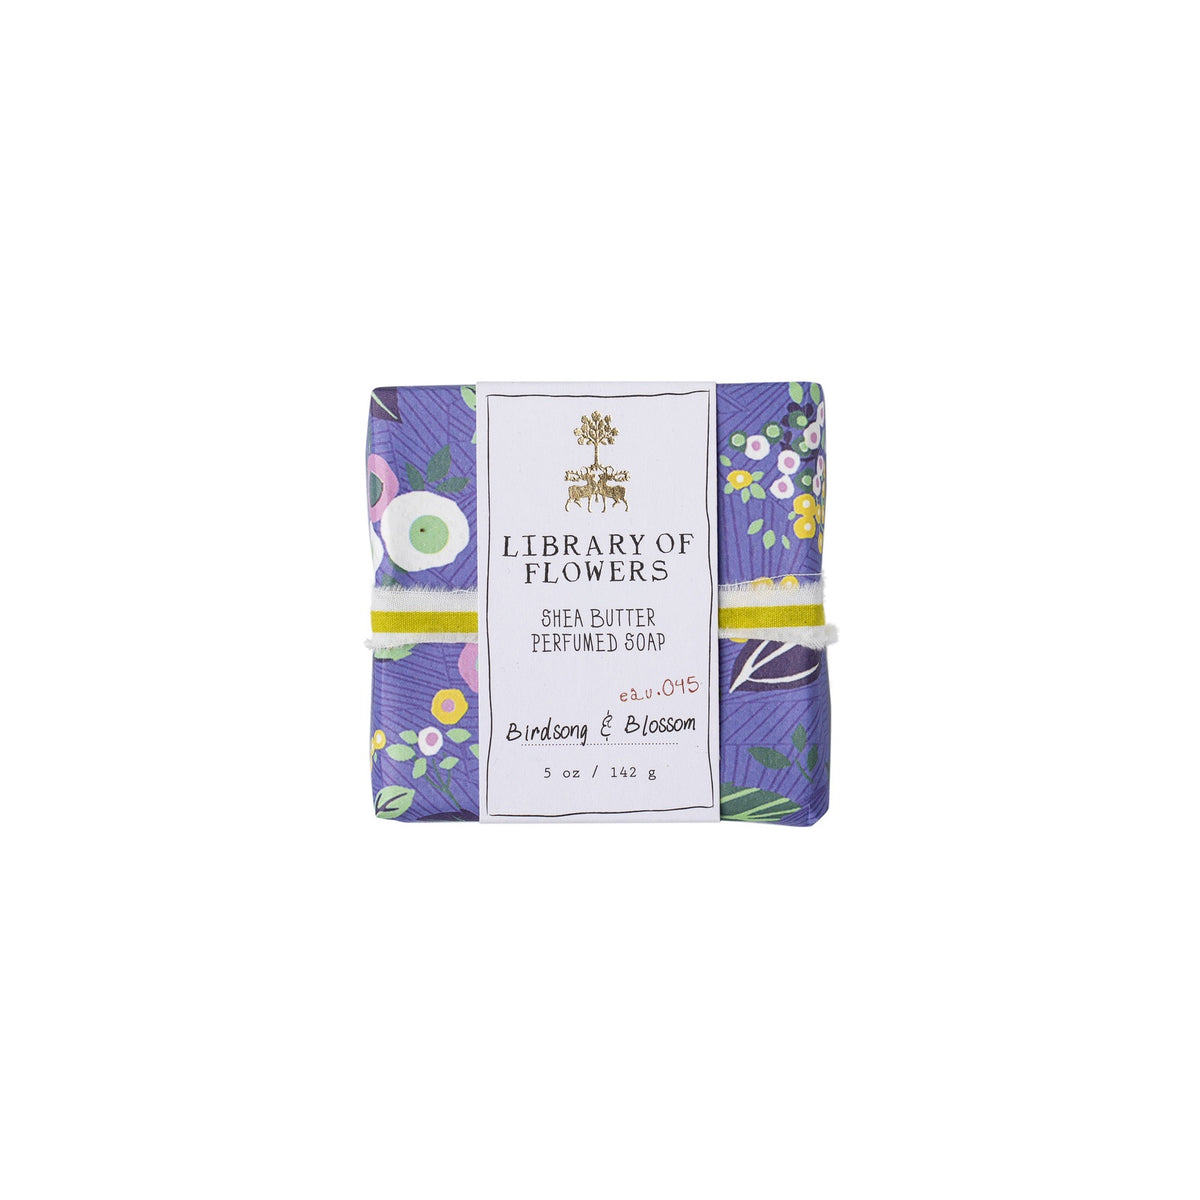 Periwinkle Floral Wrapped Soap